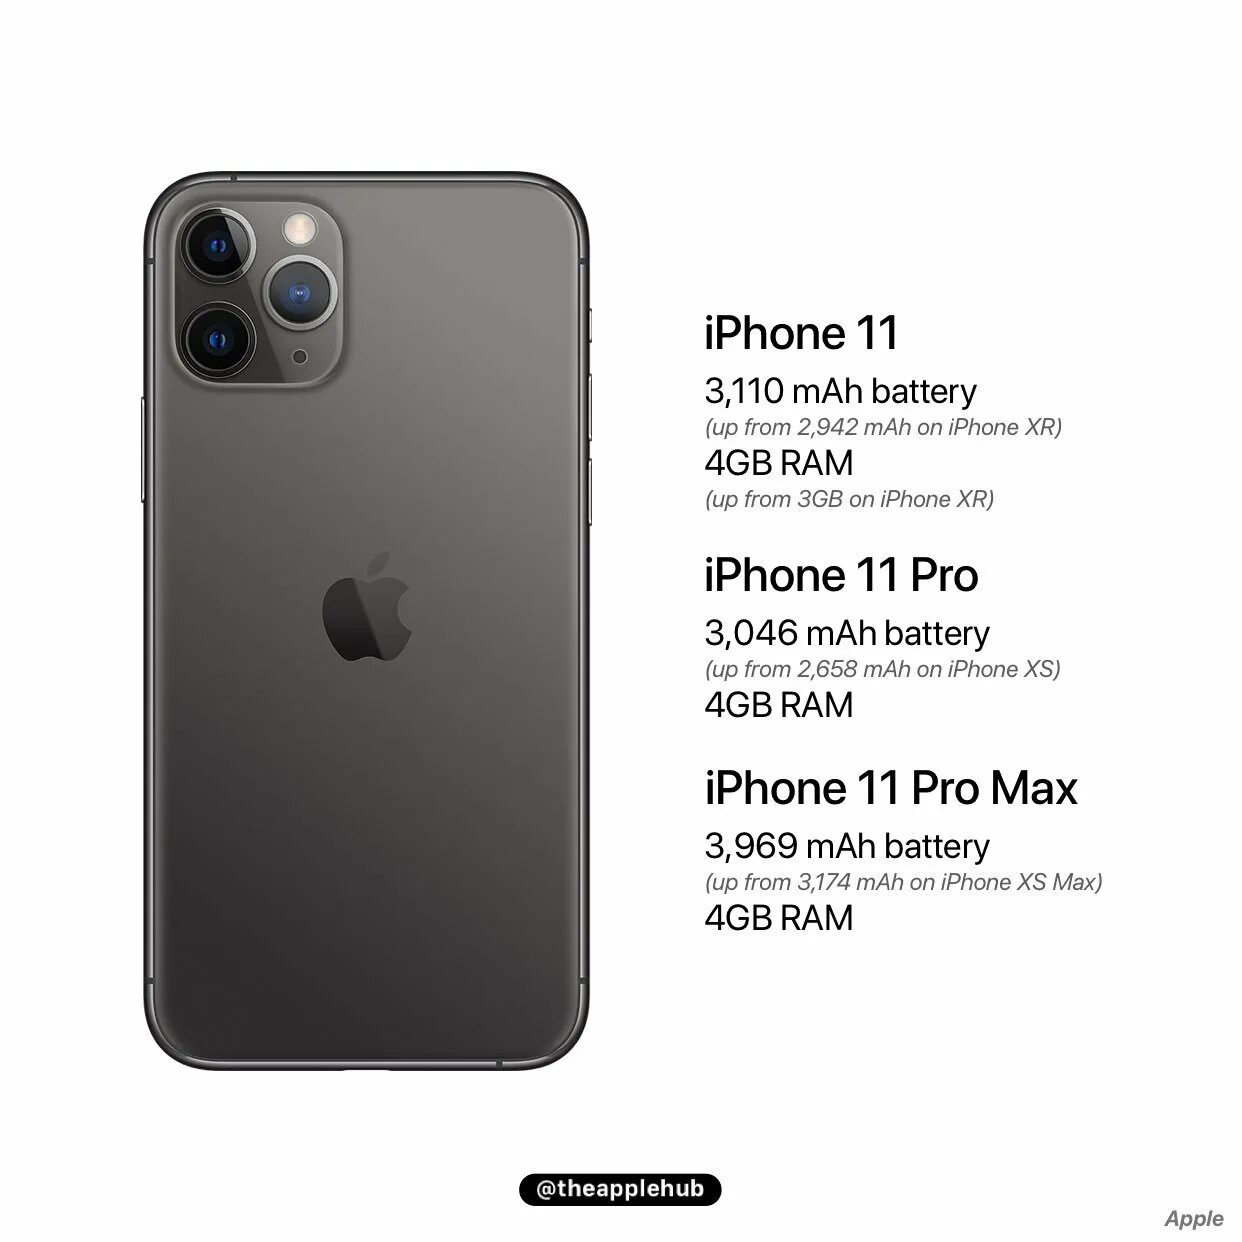 Iphone 11 Pro Max Battery МАЧ. Iphone 11 Pro Max Battery емкость. Iphone 11 Pro Battery. Iphone 11 Pro Pro Max.